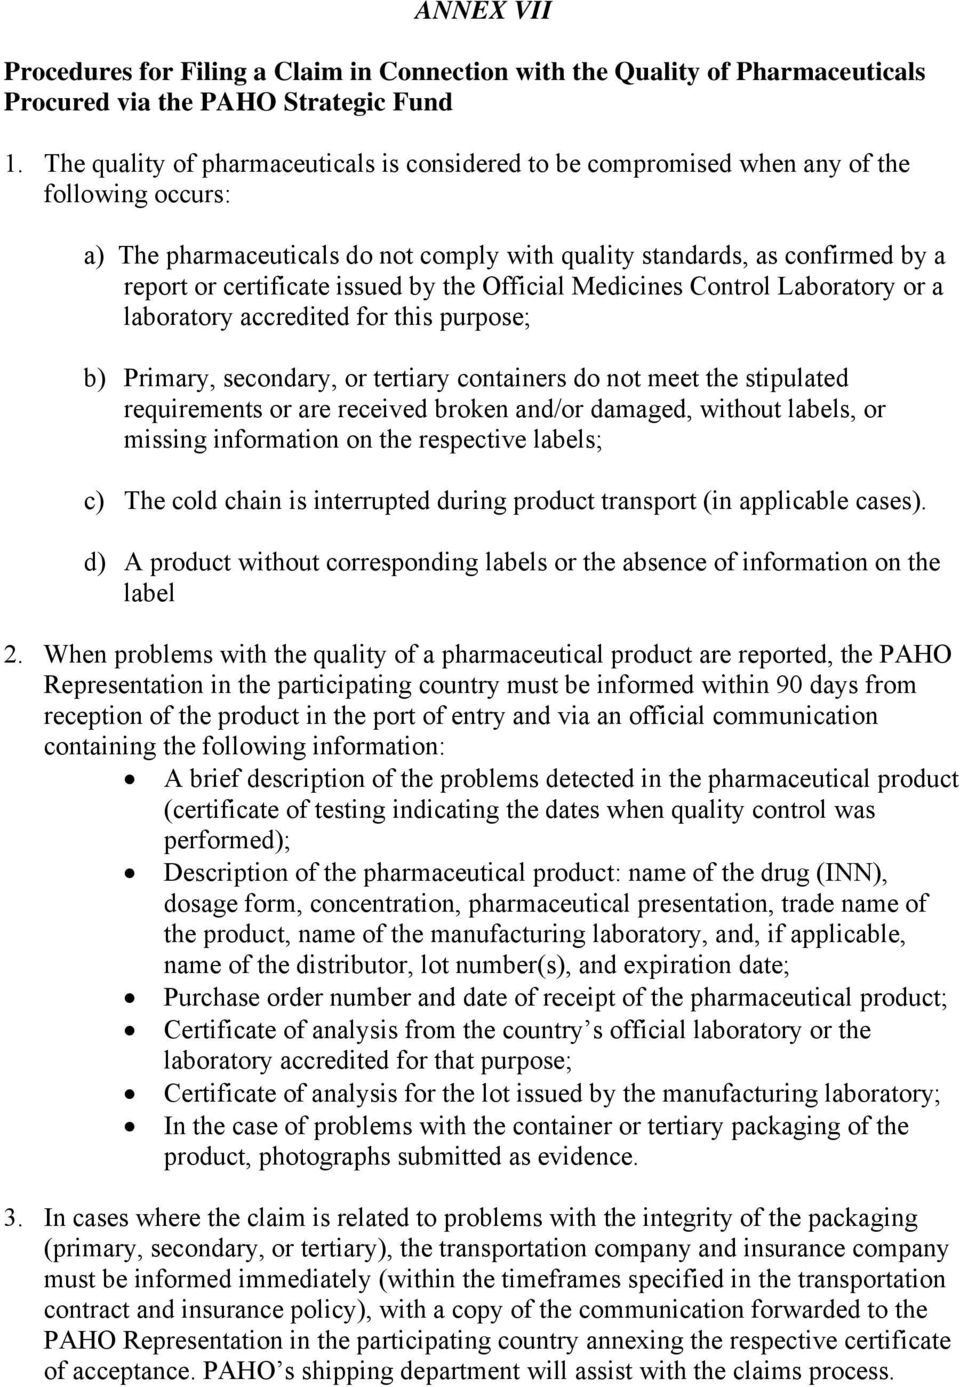 issued by the Official Medicines Control Laboratory or a laboratory accredited for this purpose; b) Primary, secondary, or tertiary containers do not meet the stipulated requirements or are received